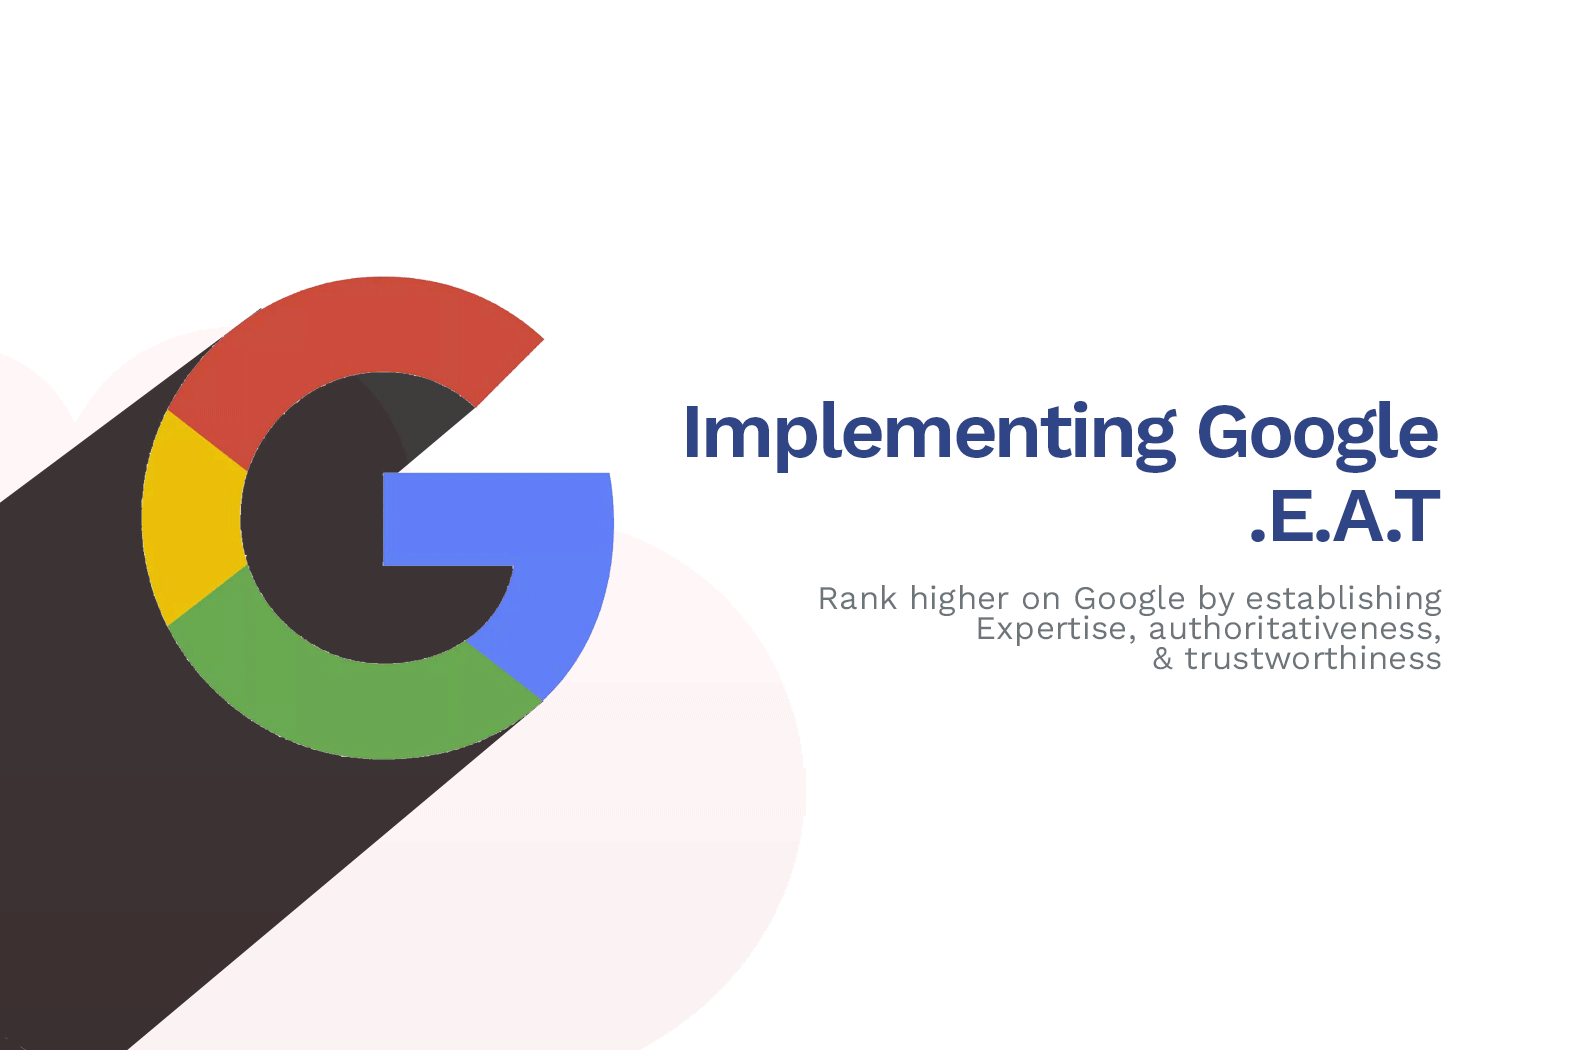 How-To-Implement-Google-EAT-to-Rank-#1-on-Google-Search-Results